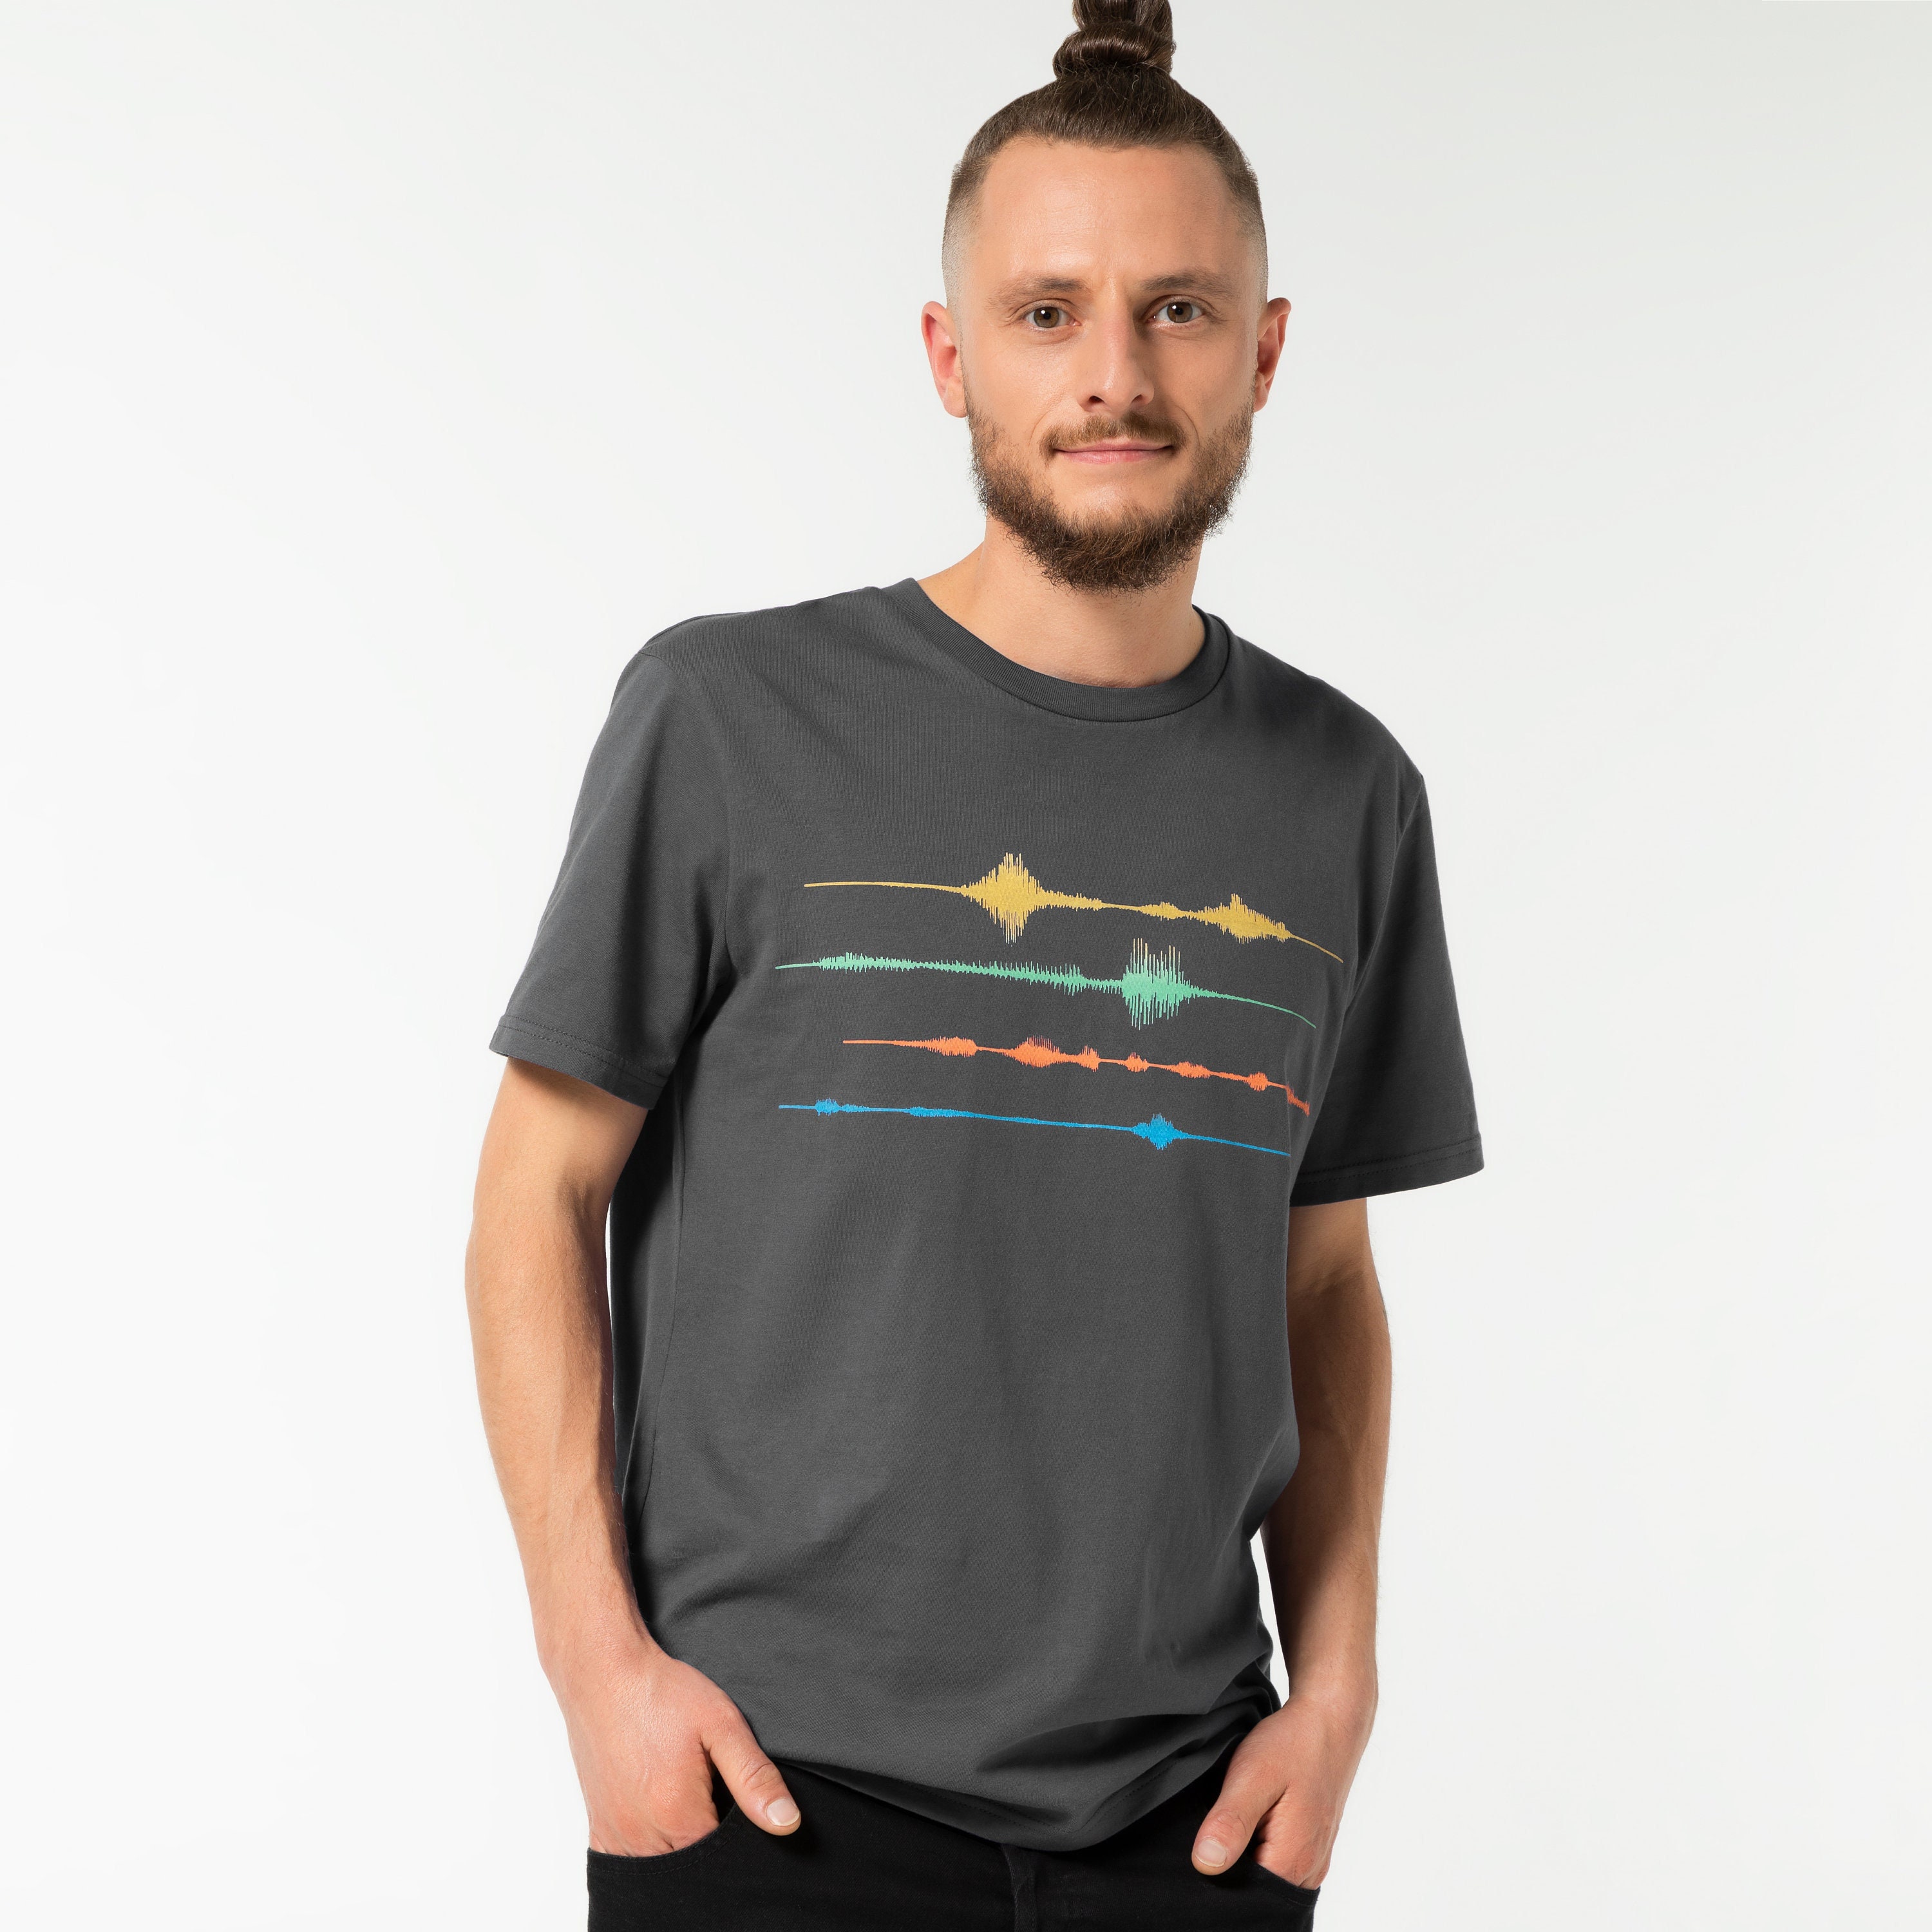 Music frequency T-Shirt